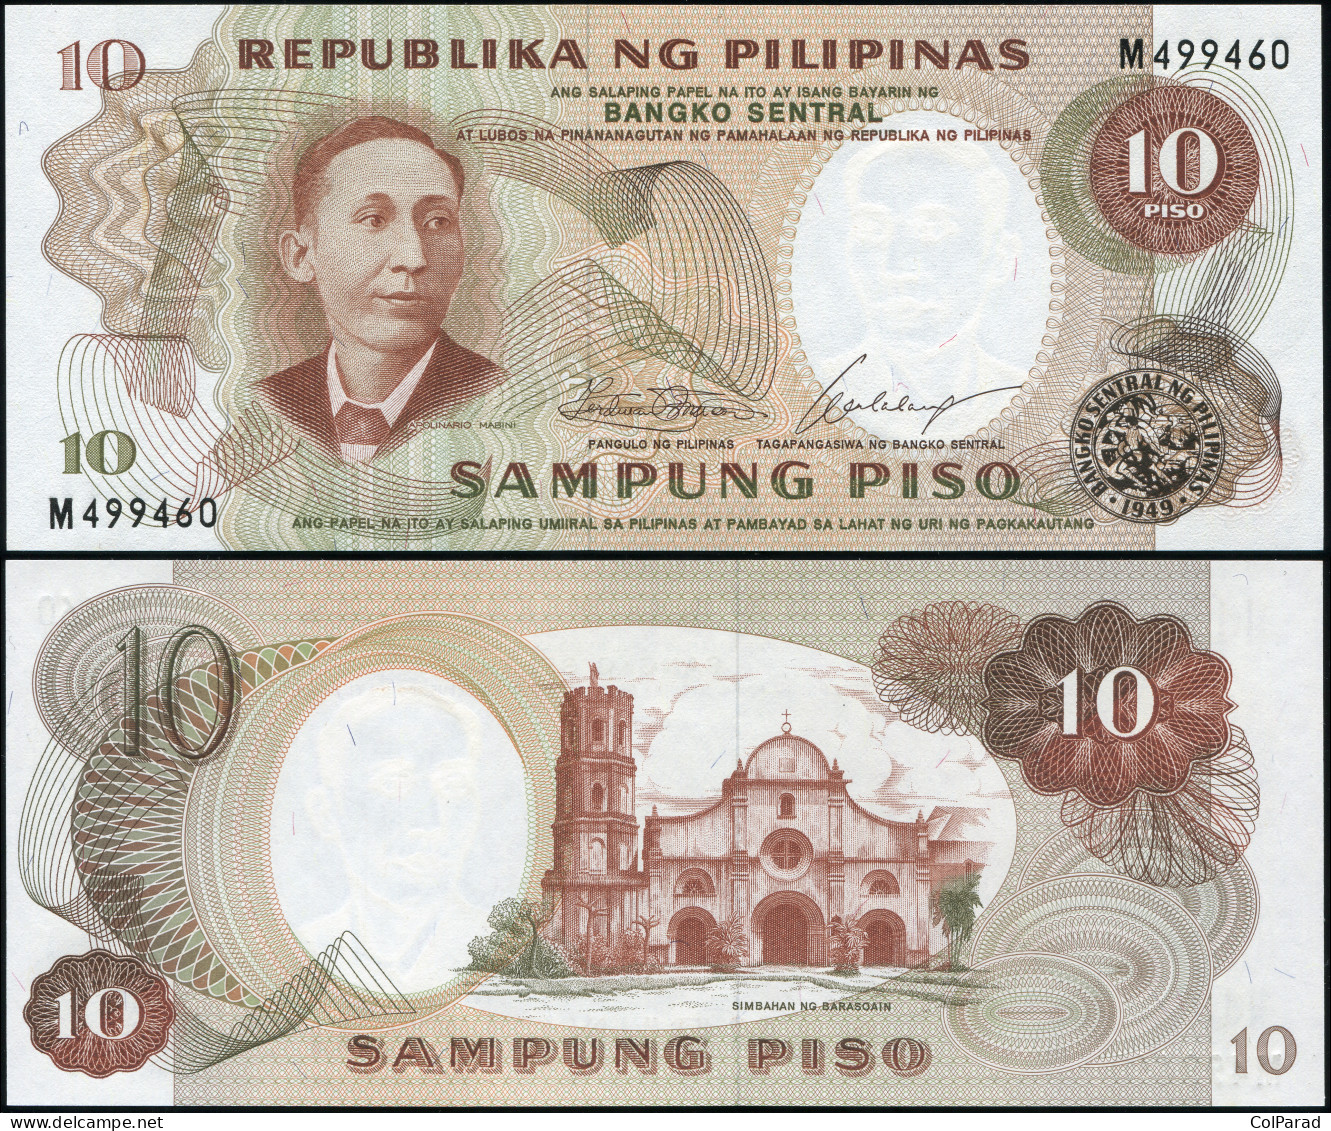 PHILIPPINES 10 PISO - ND (1969) - Paper Unc - P.144a Banknote - Philippines